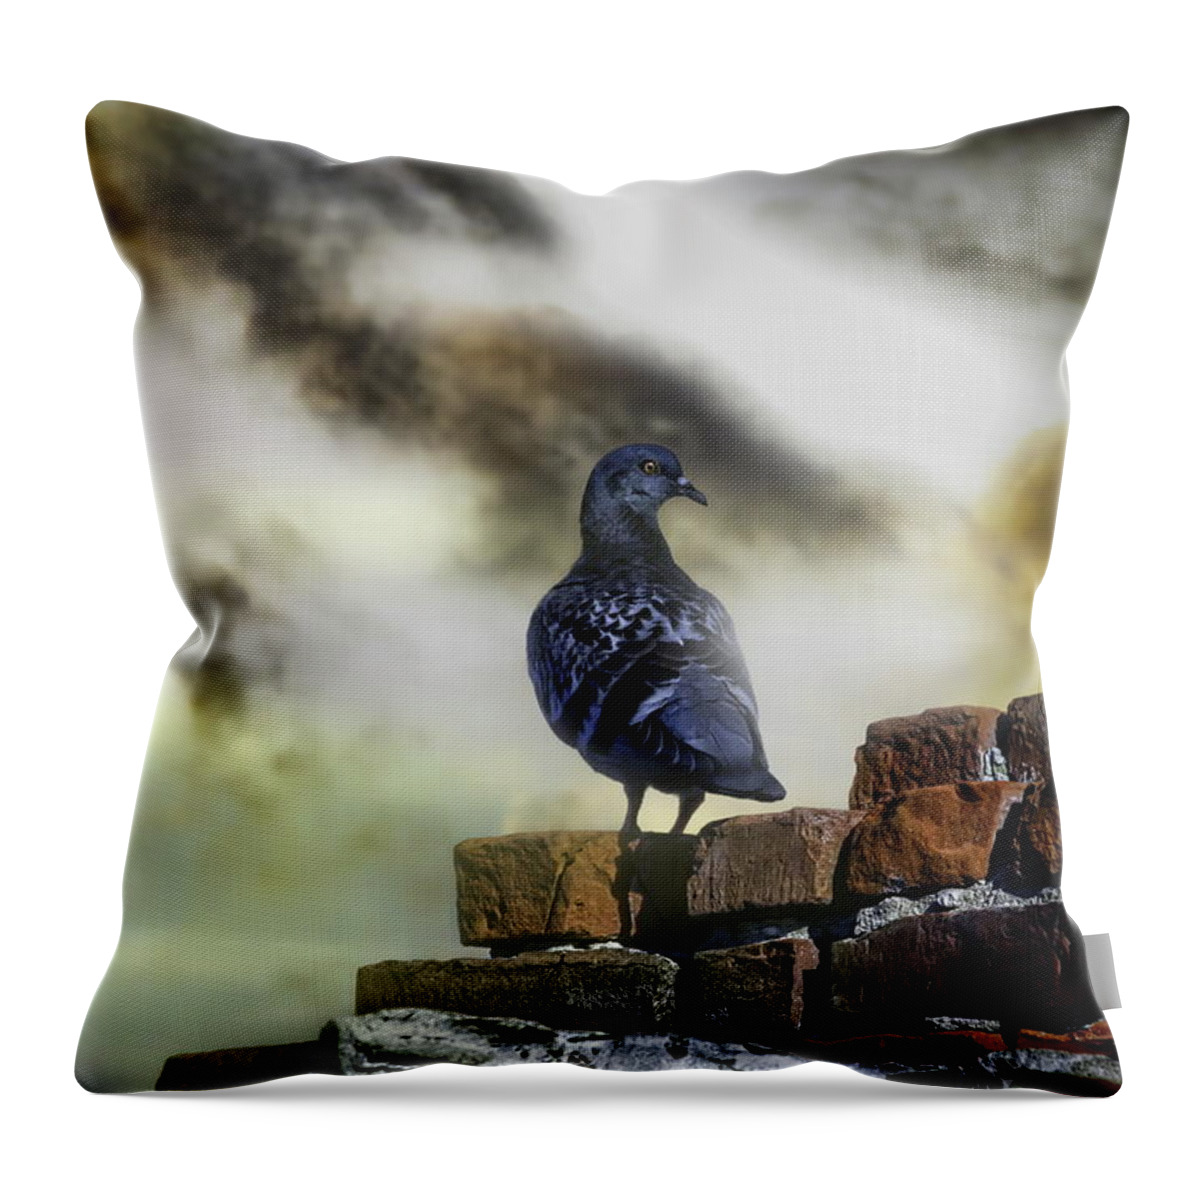 Pigeon Throw Pillow featuring the photograph Proud To Be A Pigeon by Bob Orsillo